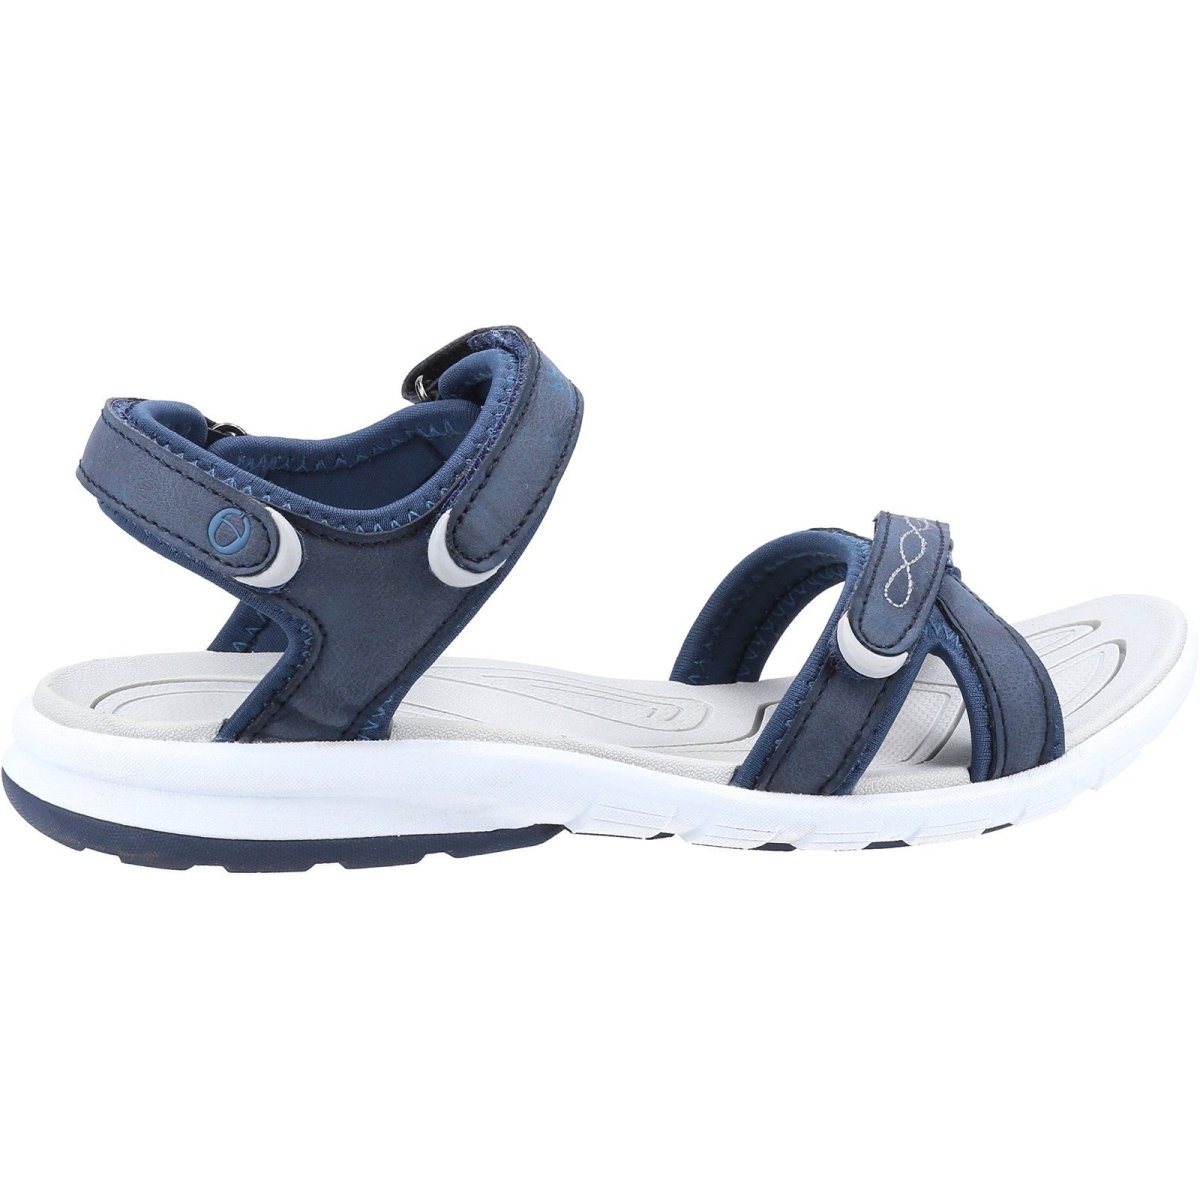 Cotswold Whiteshill Ladies Summer Recycled Sandals - Shoe Store Direct